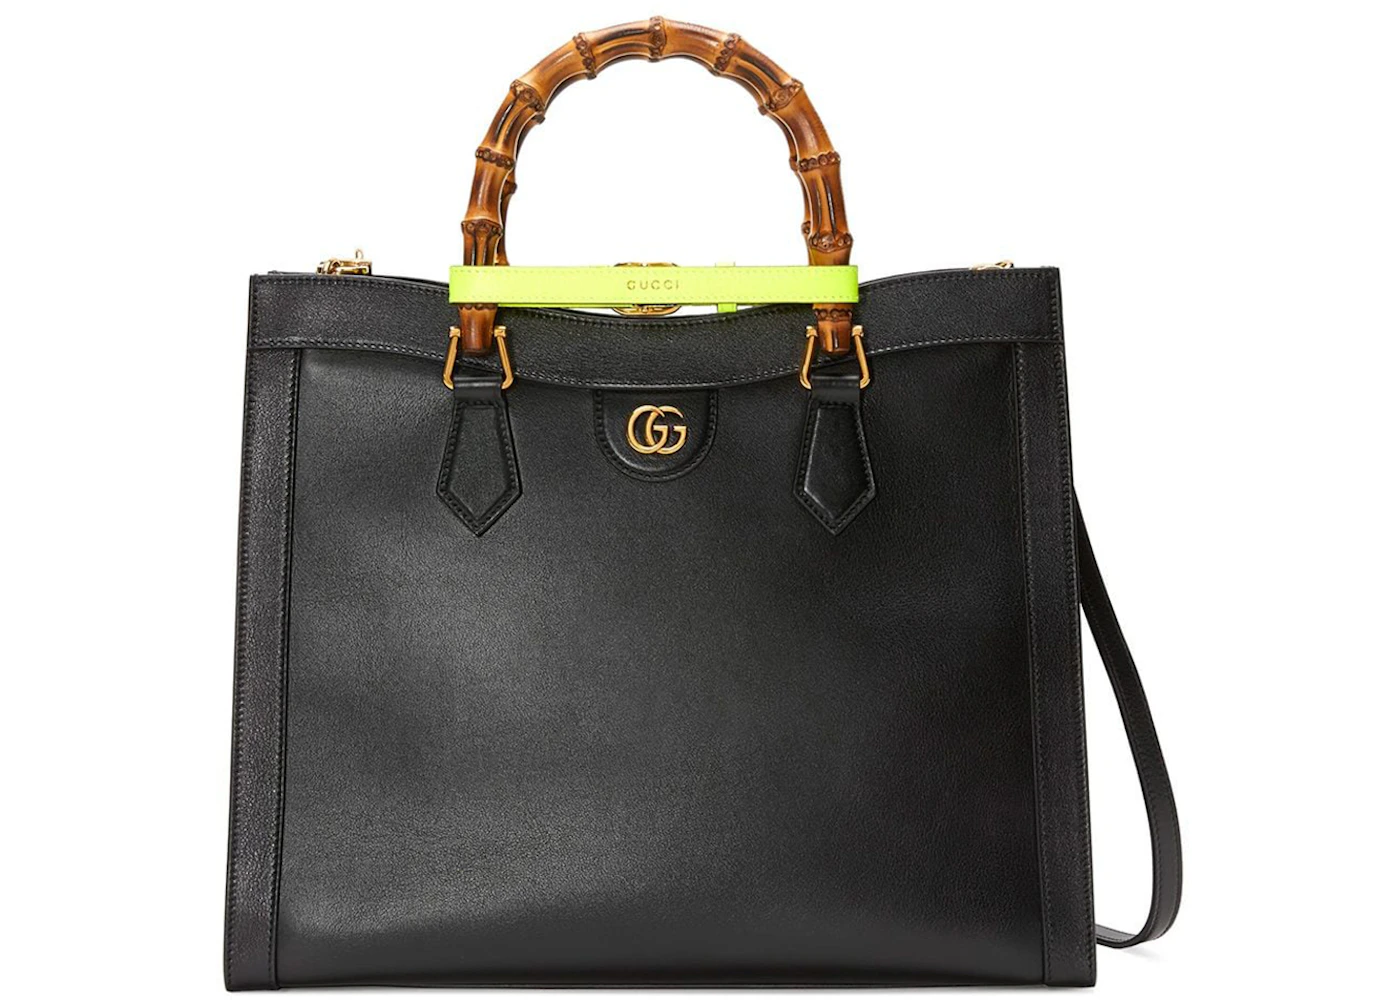 Gucci Diana Tote Medium Black/Neon in Leather with Gold-tone - US